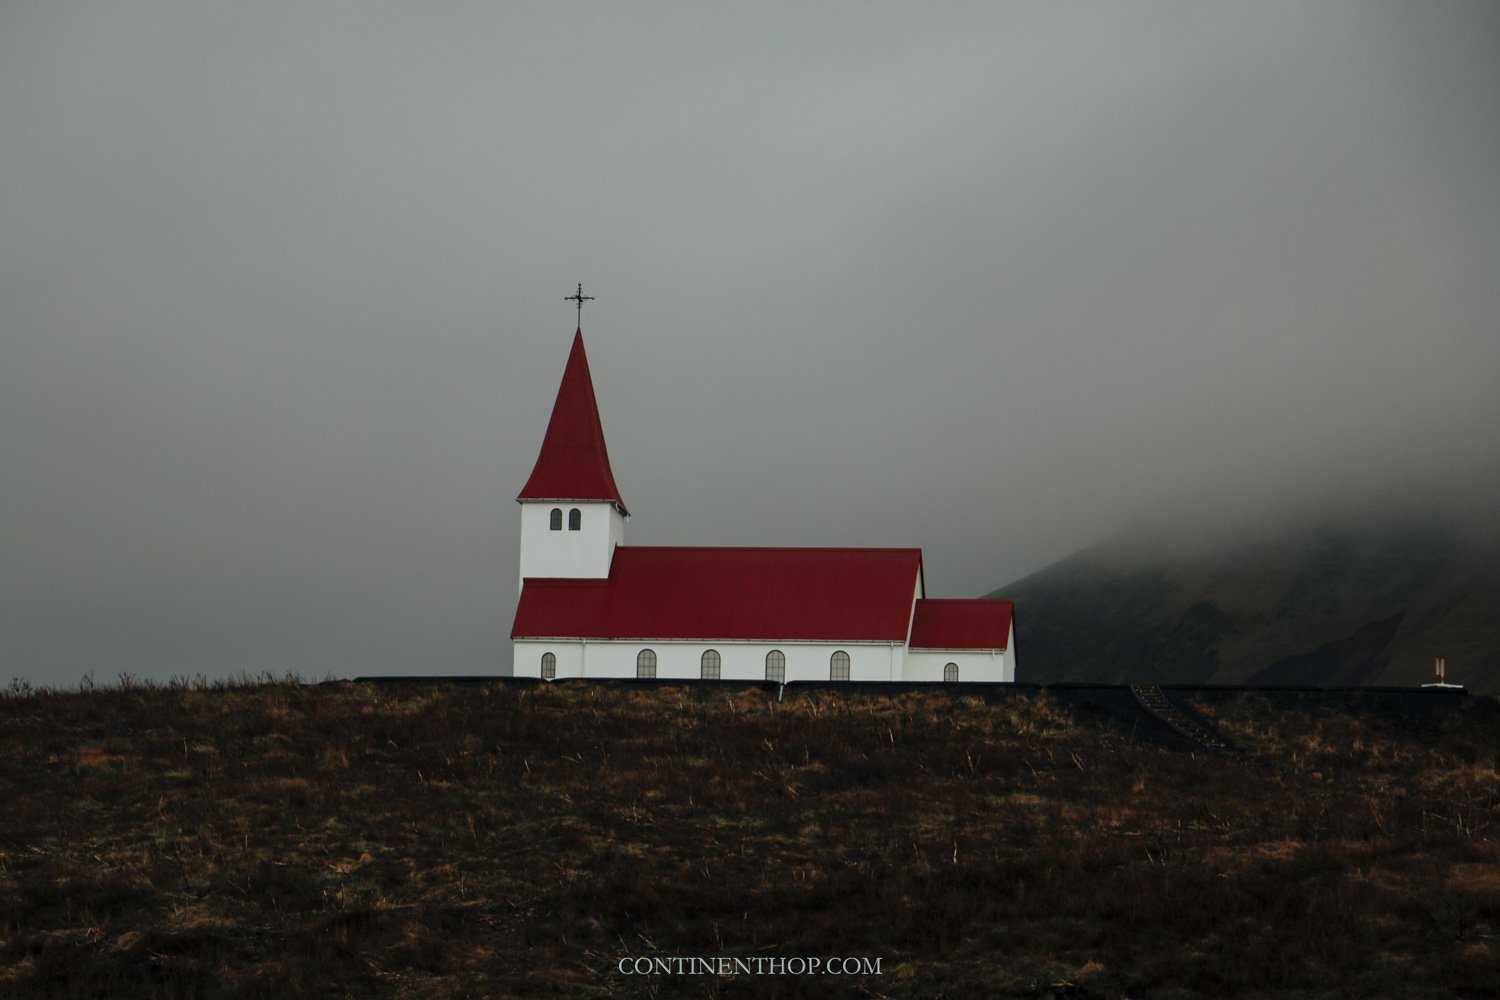 Red and white house in Iceland in August